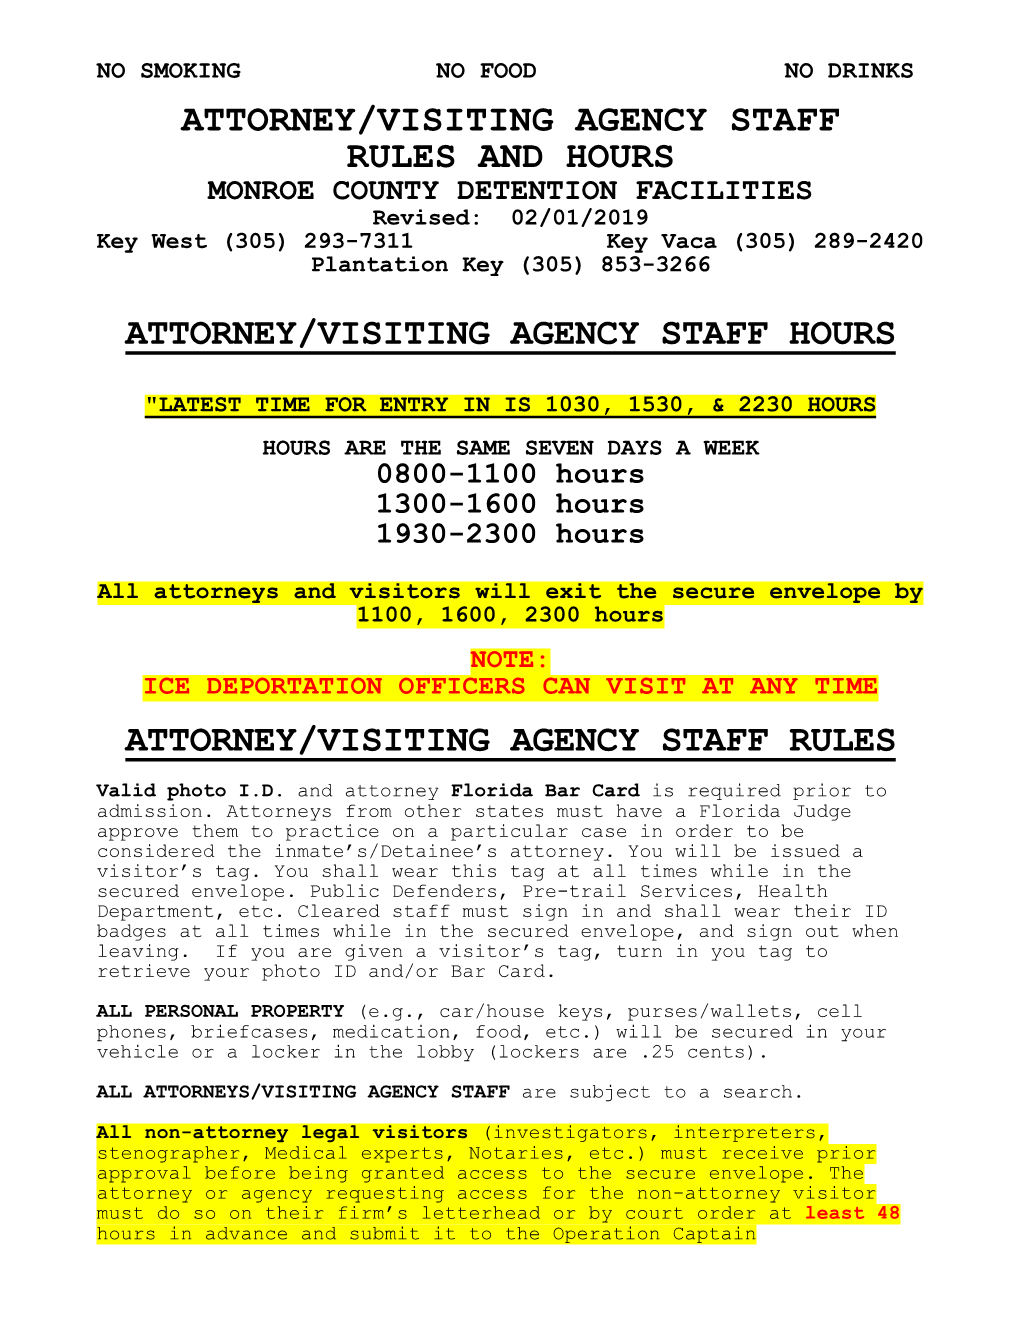 Attorney/Visiting Agency Staff Hours